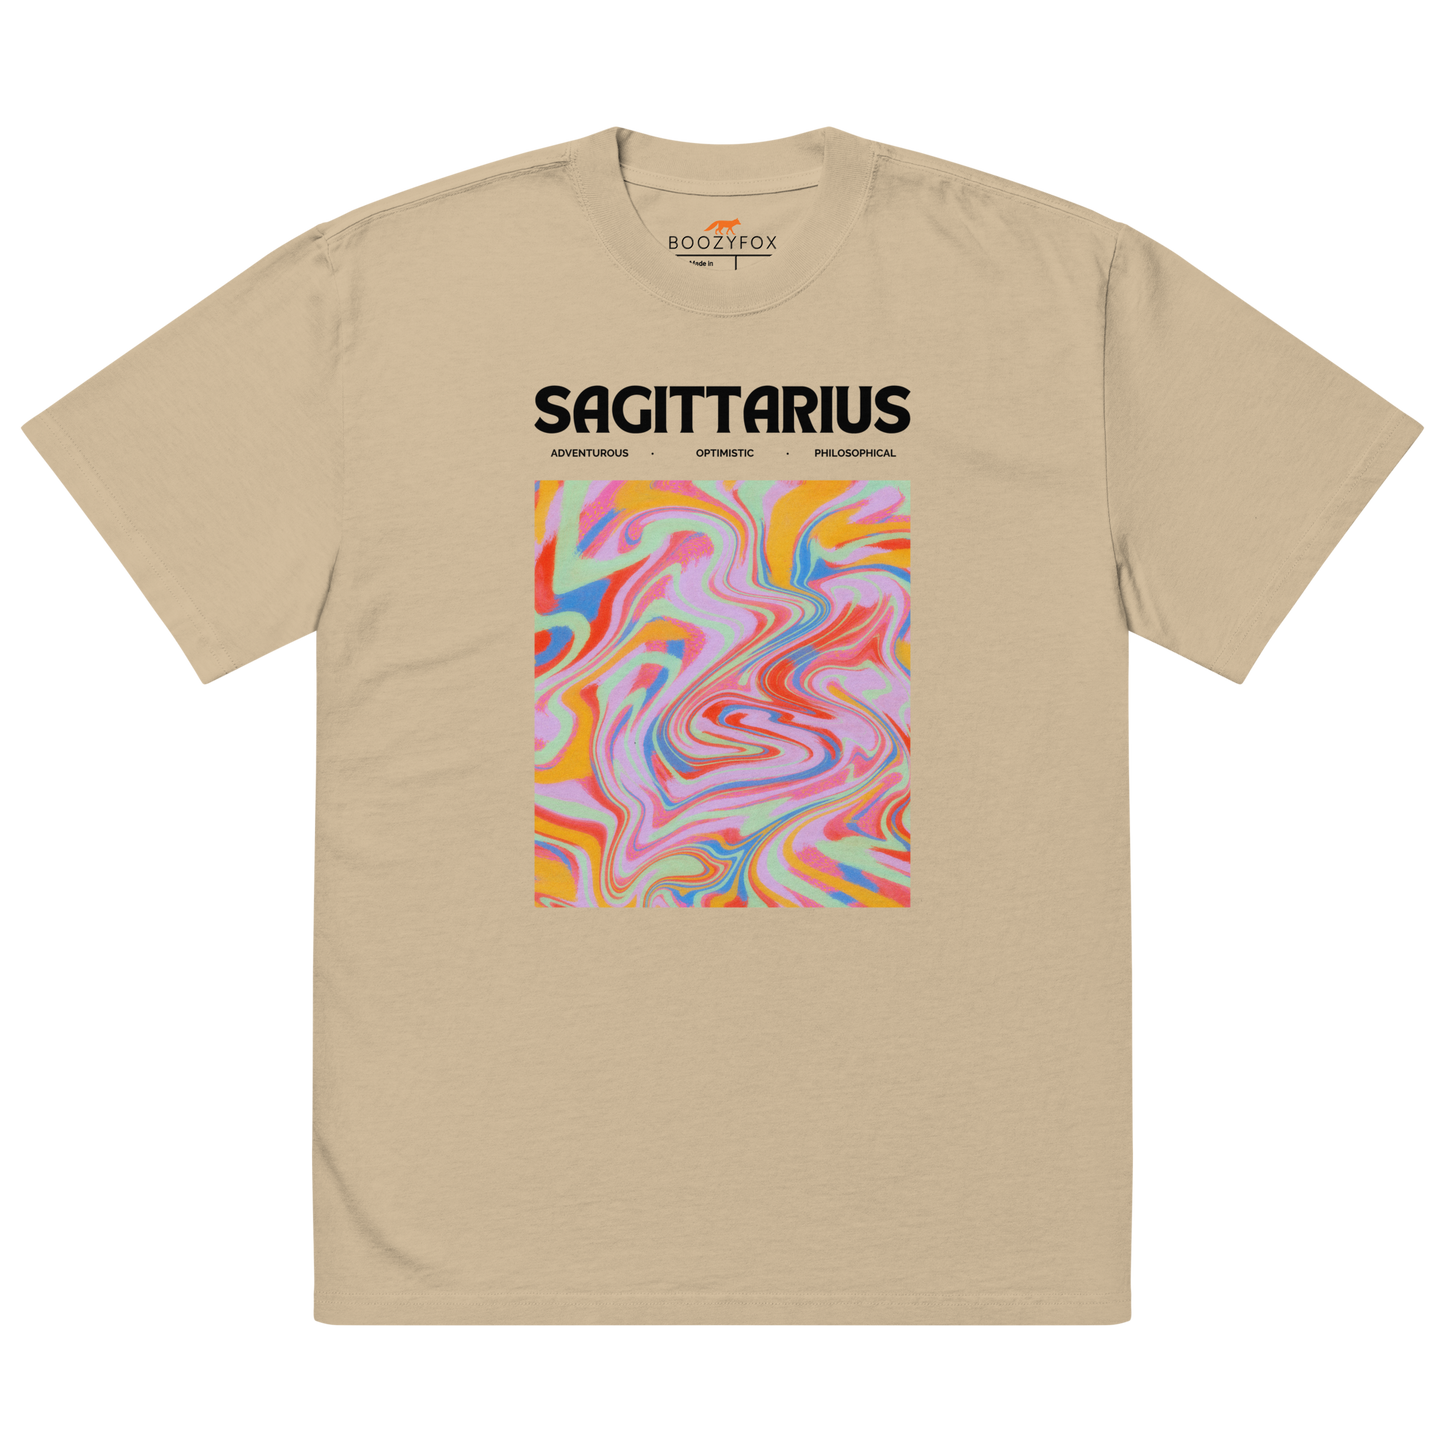 Faded Khaki Sagittarius Oversized T-Shirt featuring an Abstract Sagittarius Star Sign graphic on the chest - Cool Graphic Zodiac Oversized Tees - Boozy Fox